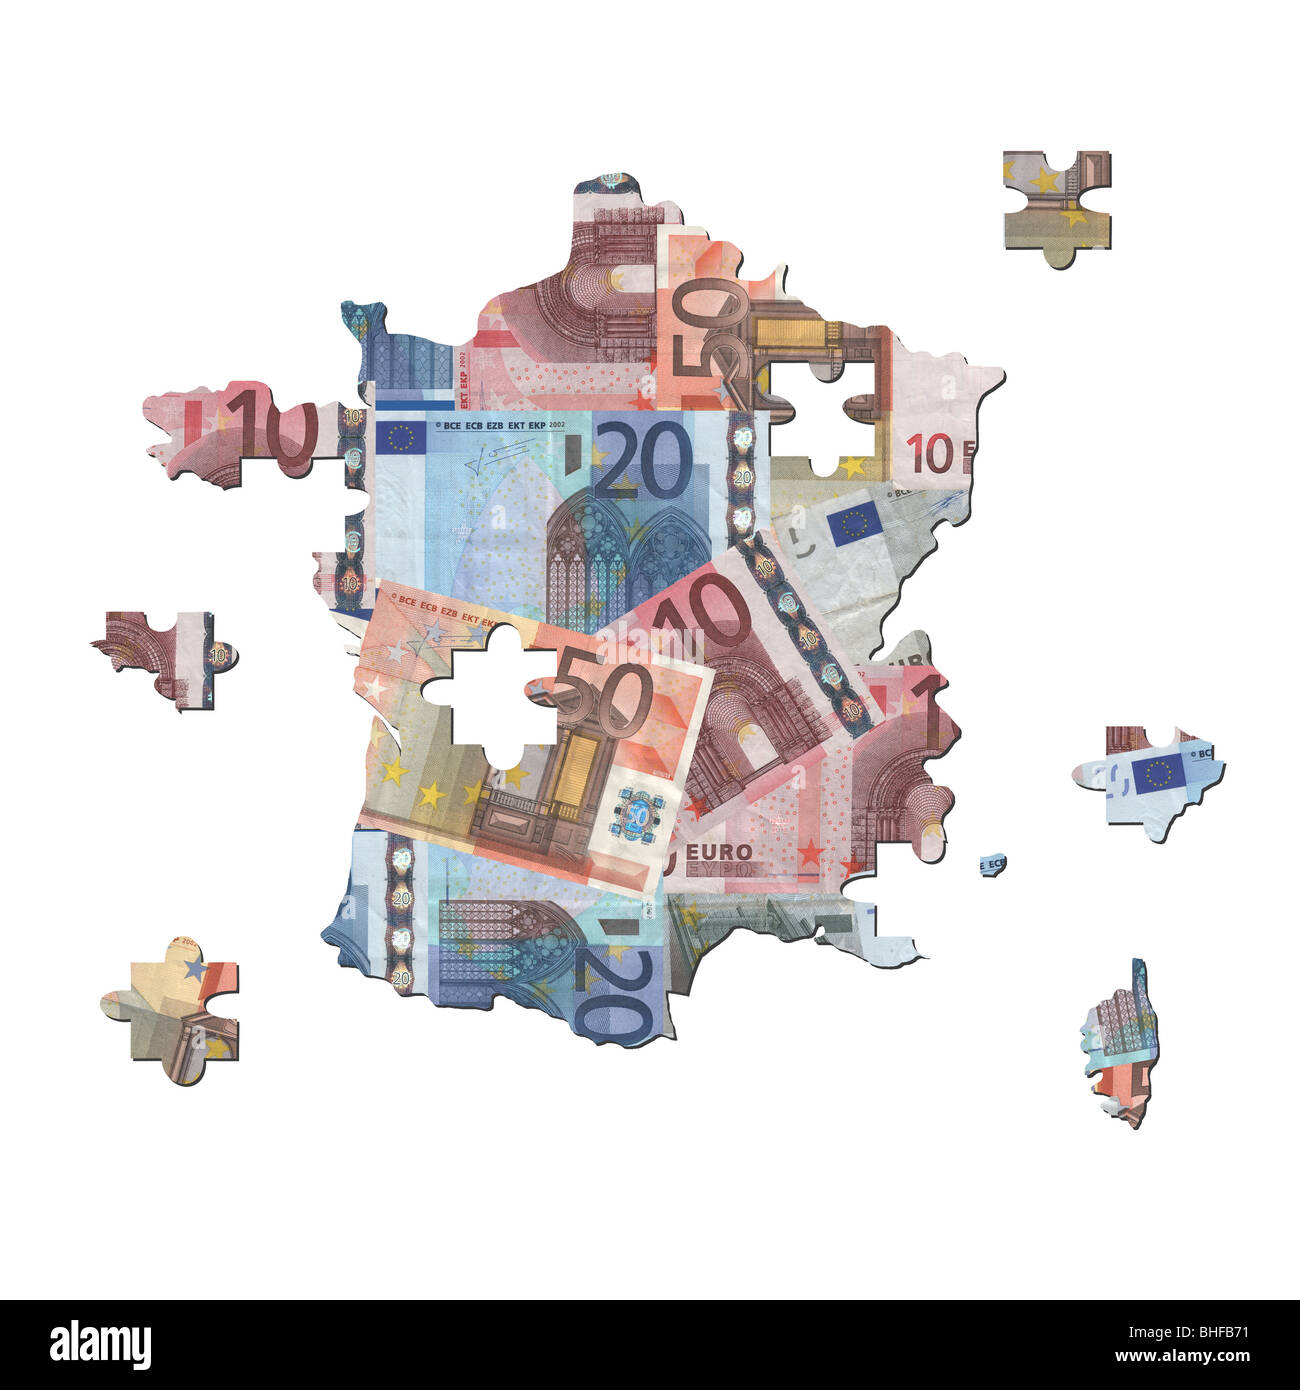 French euros Map jigsaw with missing pieces illustration Stock Photo